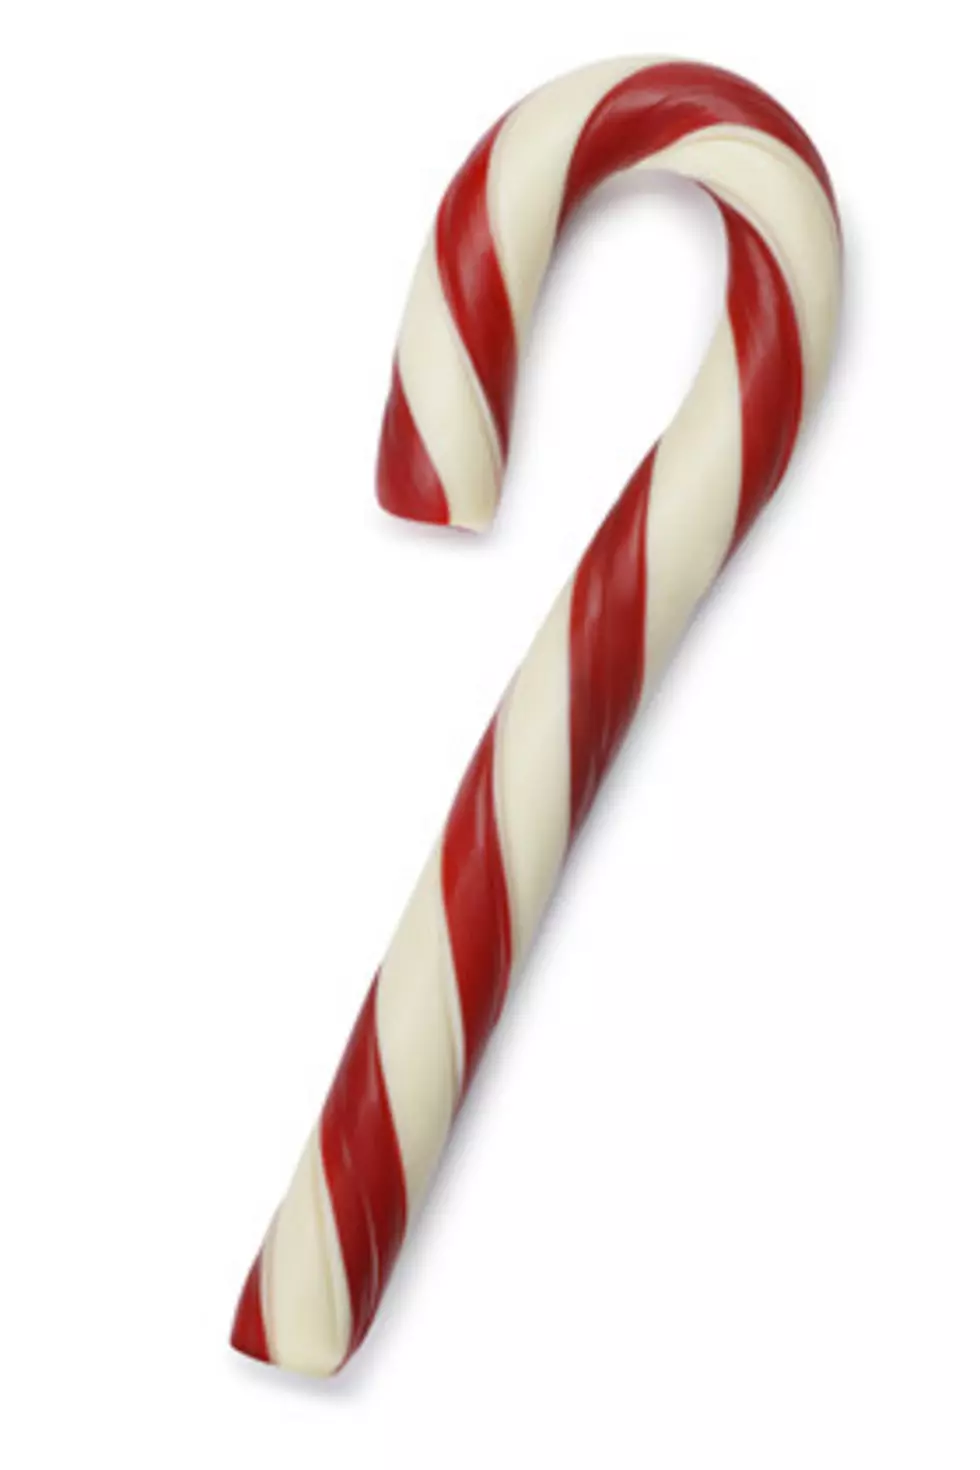 K’zoo Candy Cane Hunt Is Saturday; Moved To Mayor’s Riverfront Park